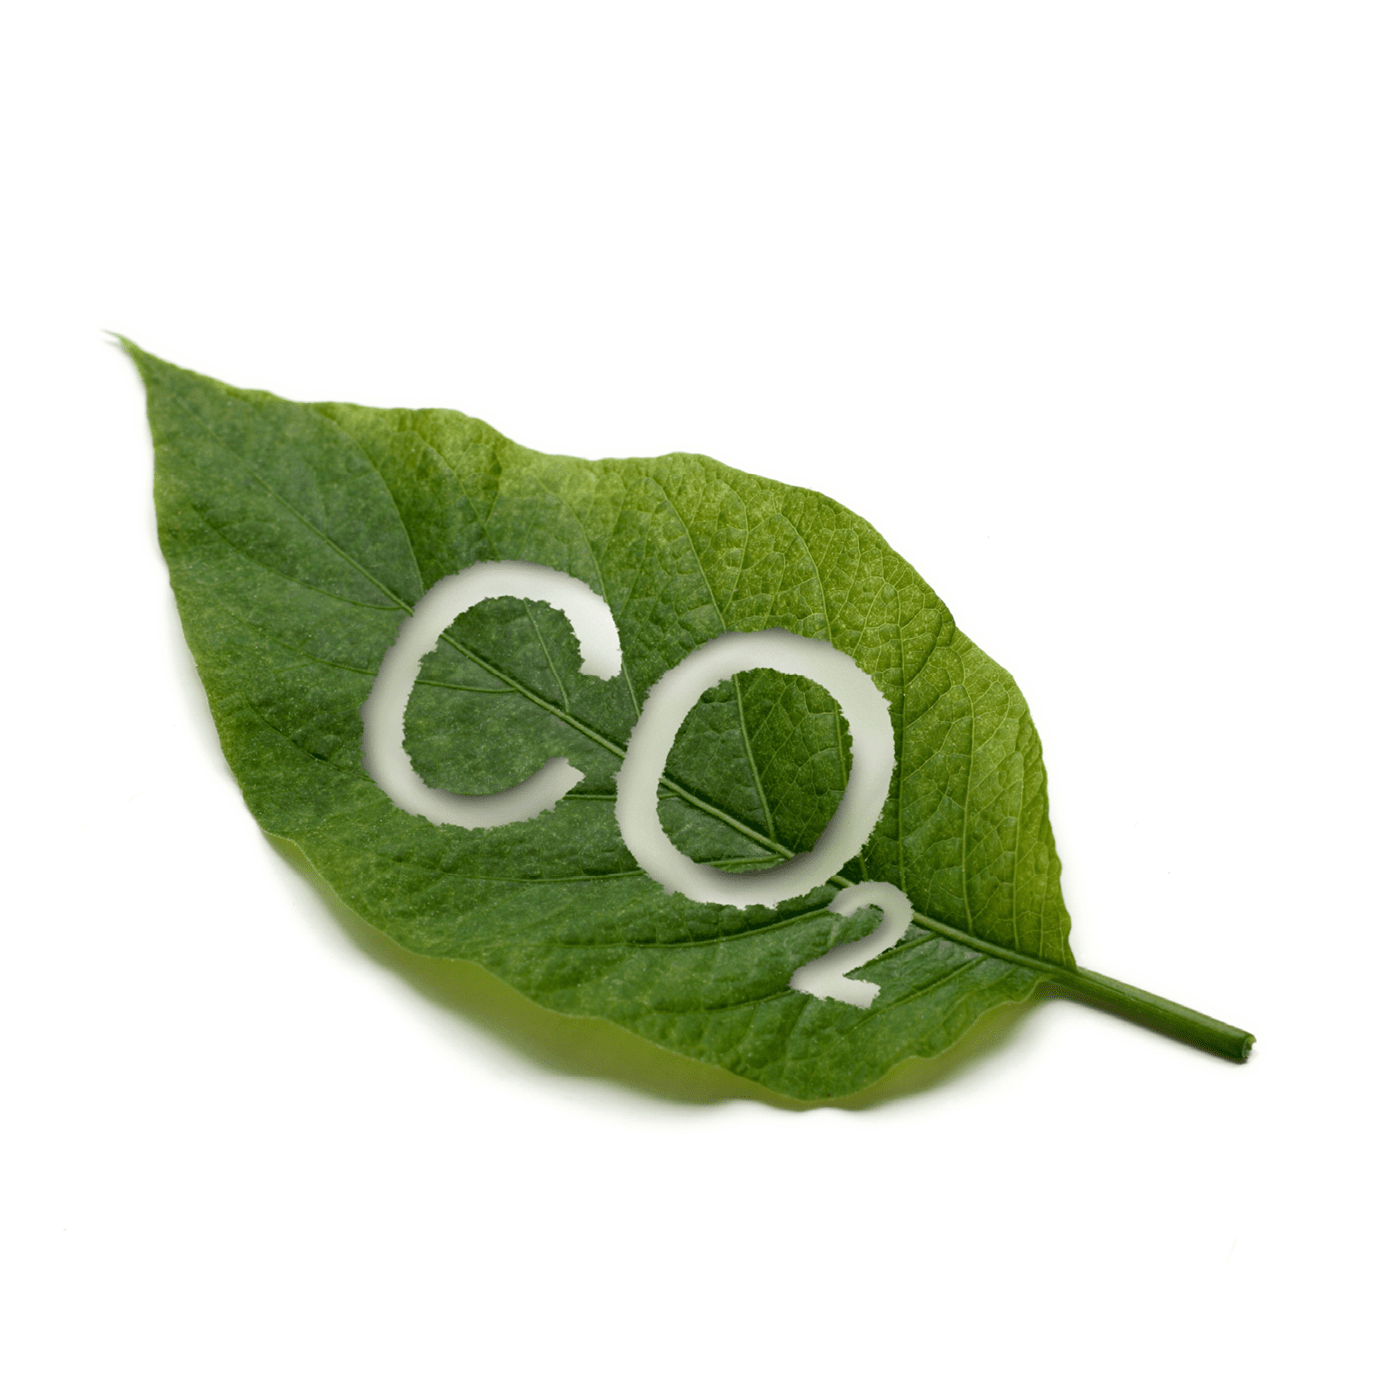 green leaf on white background, with CO2 for Carbon Dioxide cut out, illustrating the function of plants to process CO2